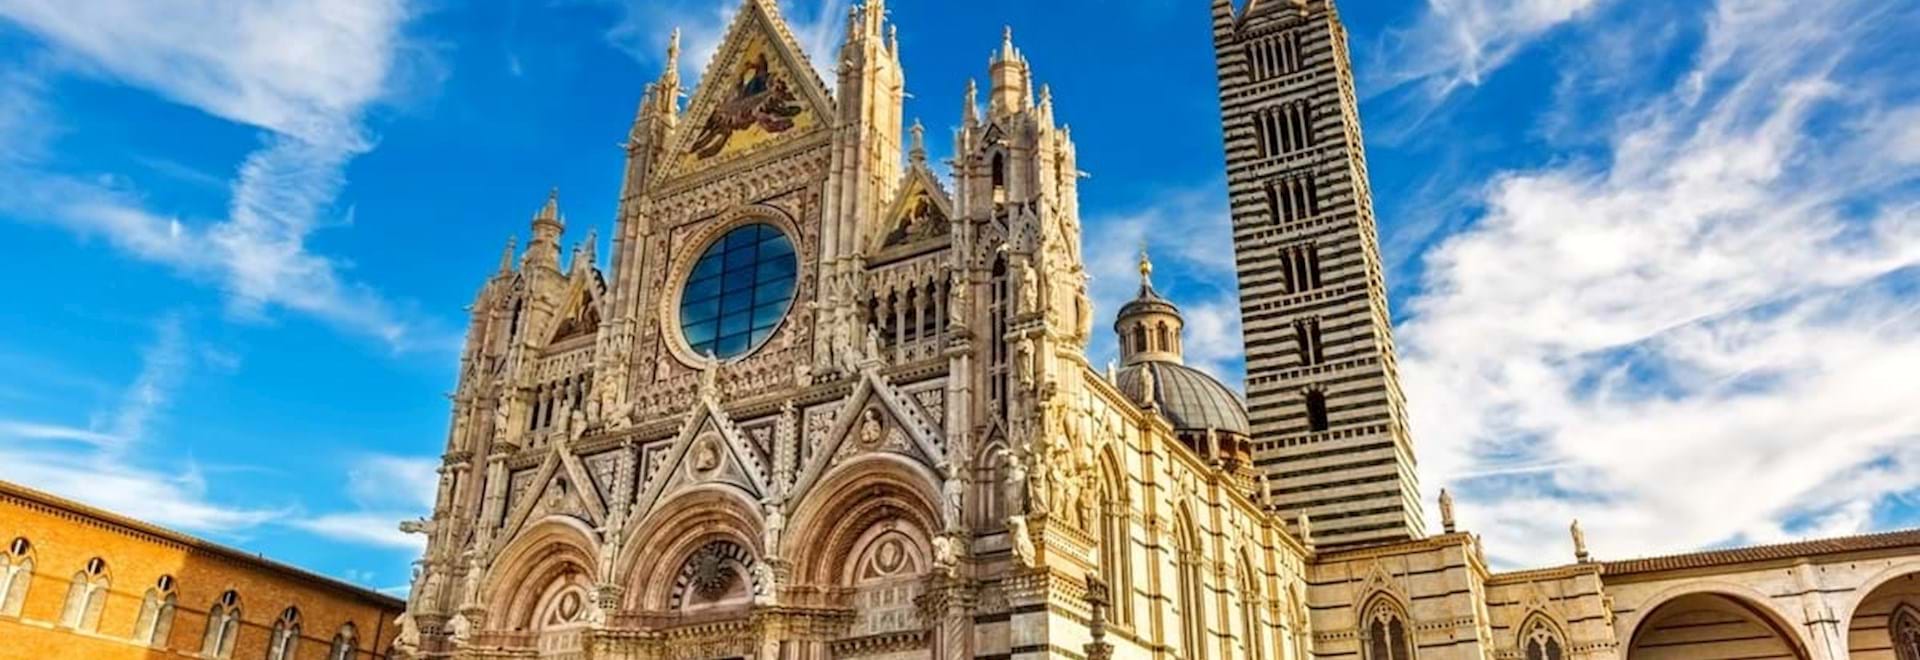 Front view of the Duomo in Siena